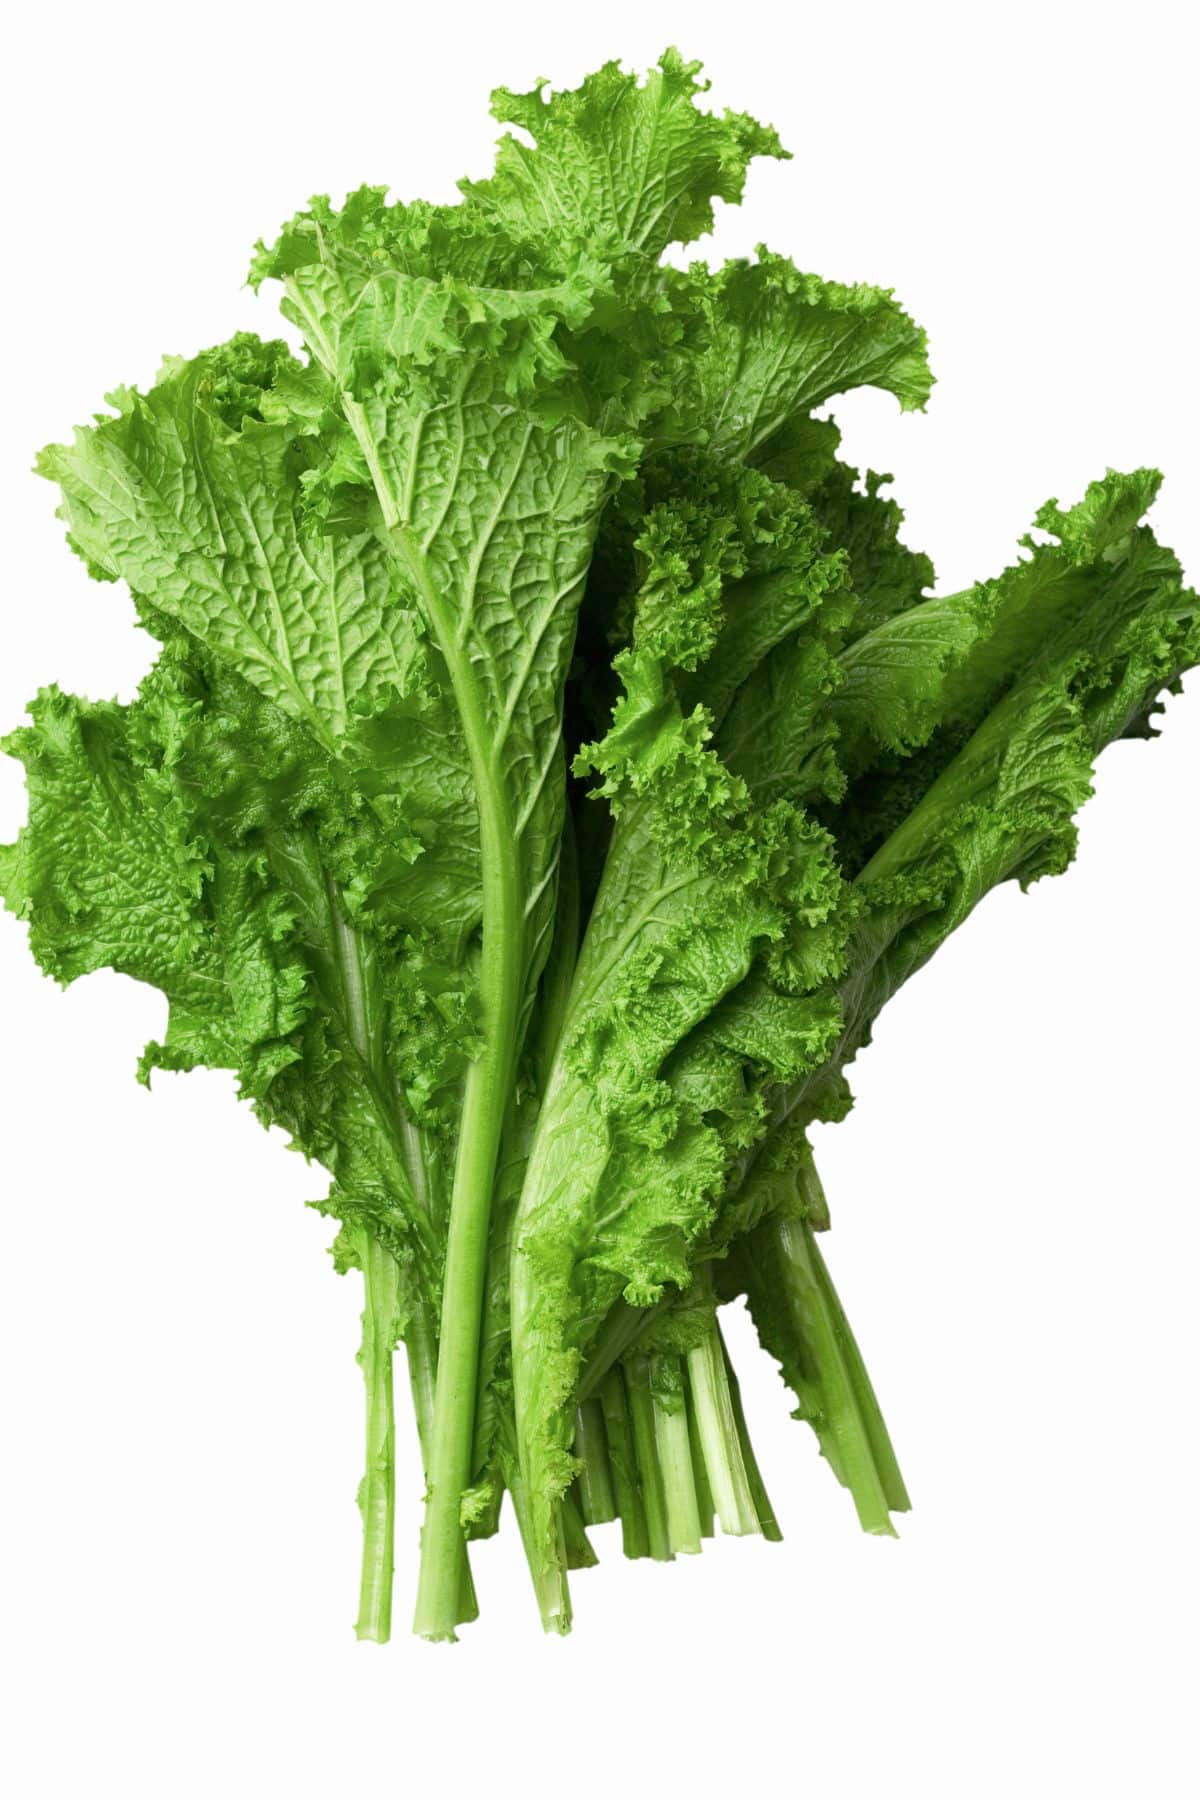 Bunch of mustard greens on white background.